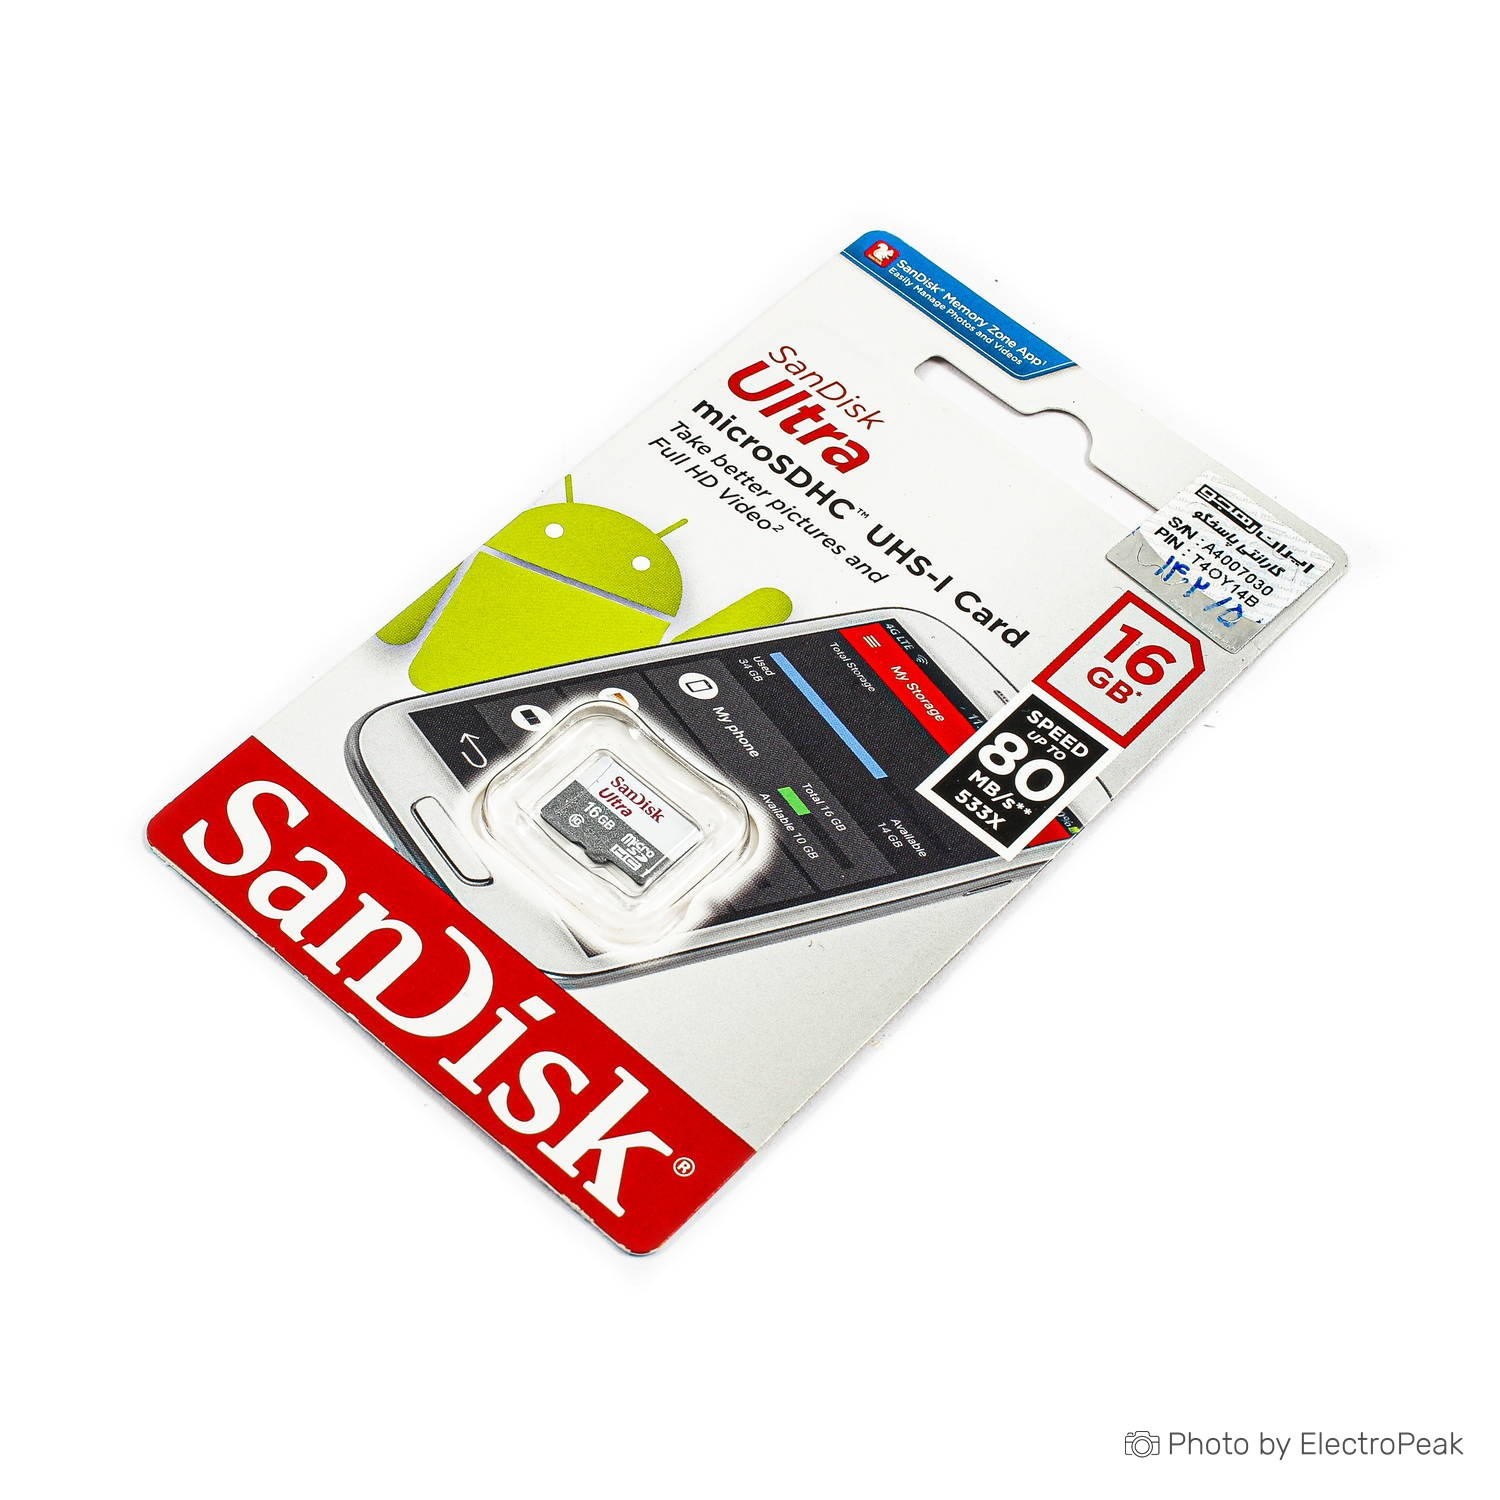 SanDisk 16GB Class 4 MicroSDHC Memory Card with Adapter